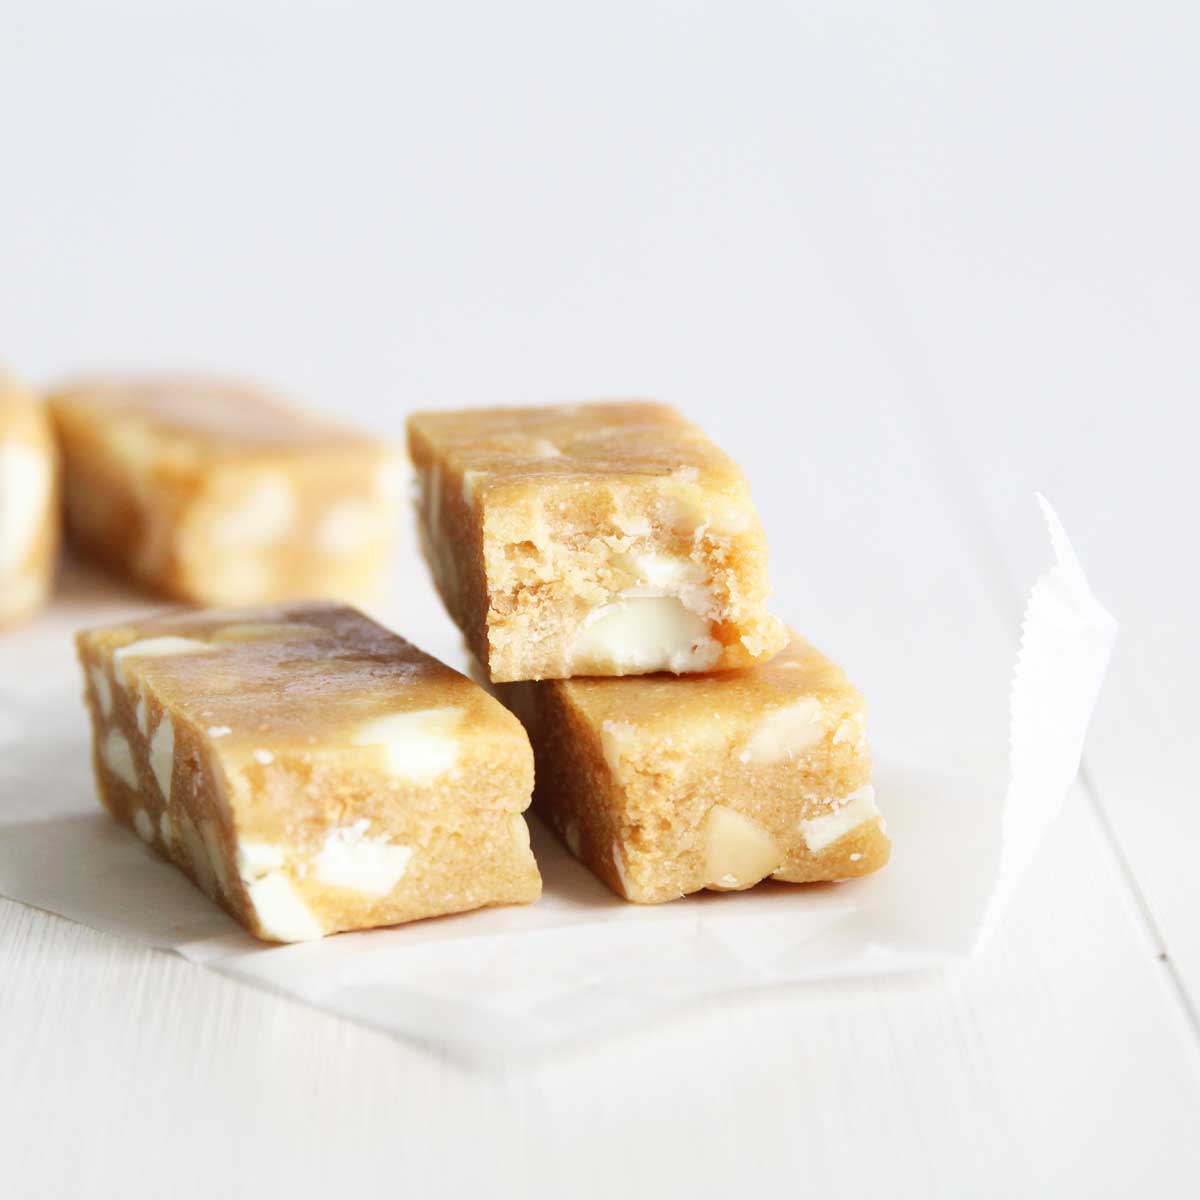 Chunky White Chocolate Macadamia Protein Bars Recipe (made with Collagen Peptides) - Caramel Apple Dip